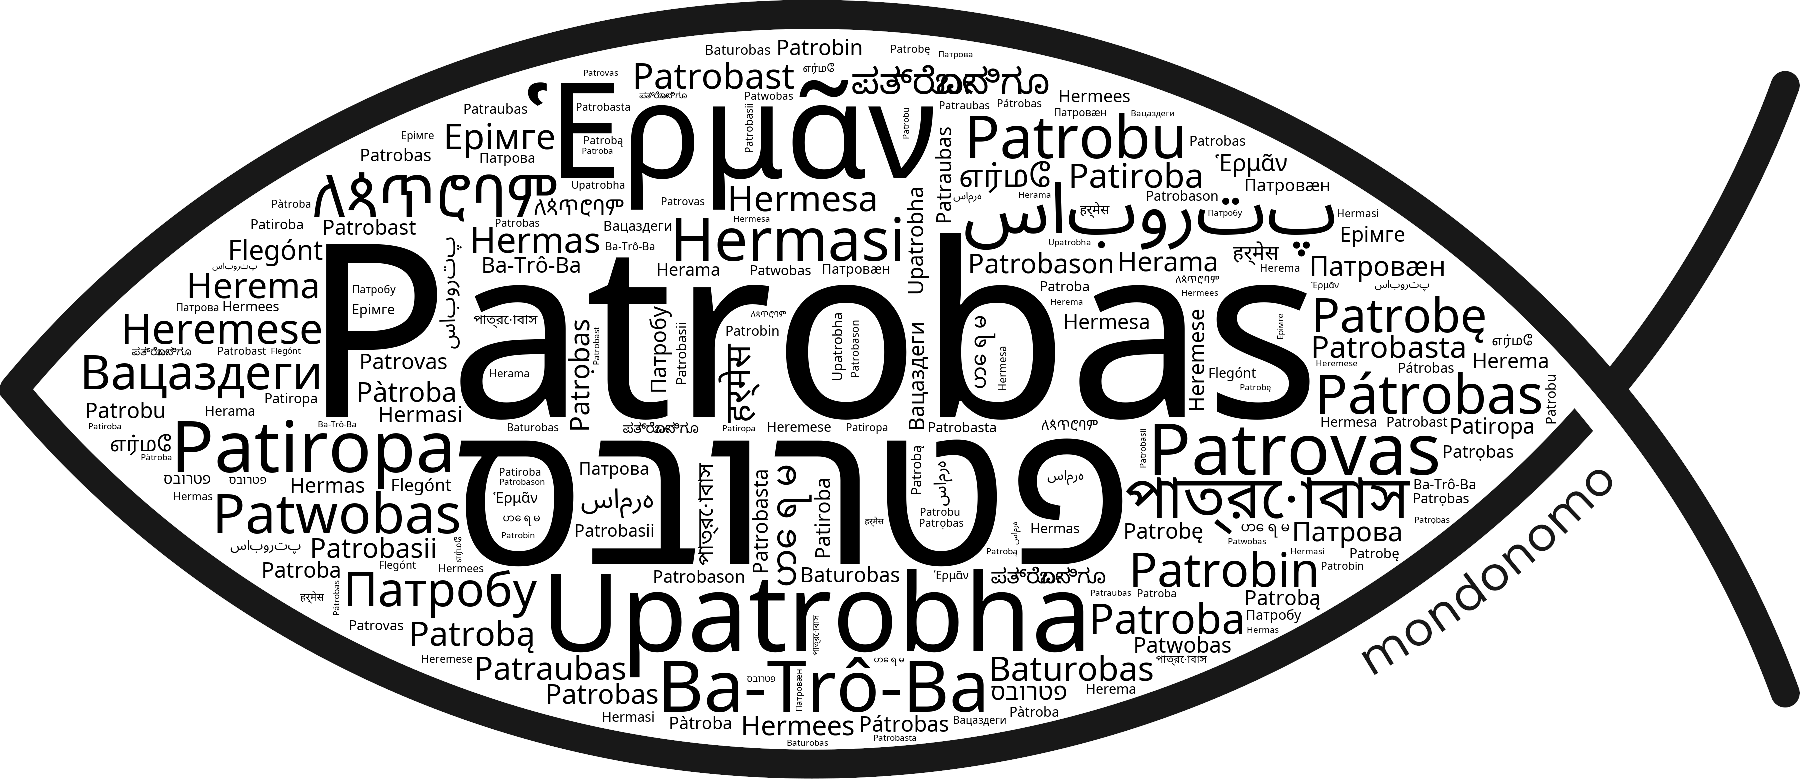 Name Patrobas in the world's Bibles